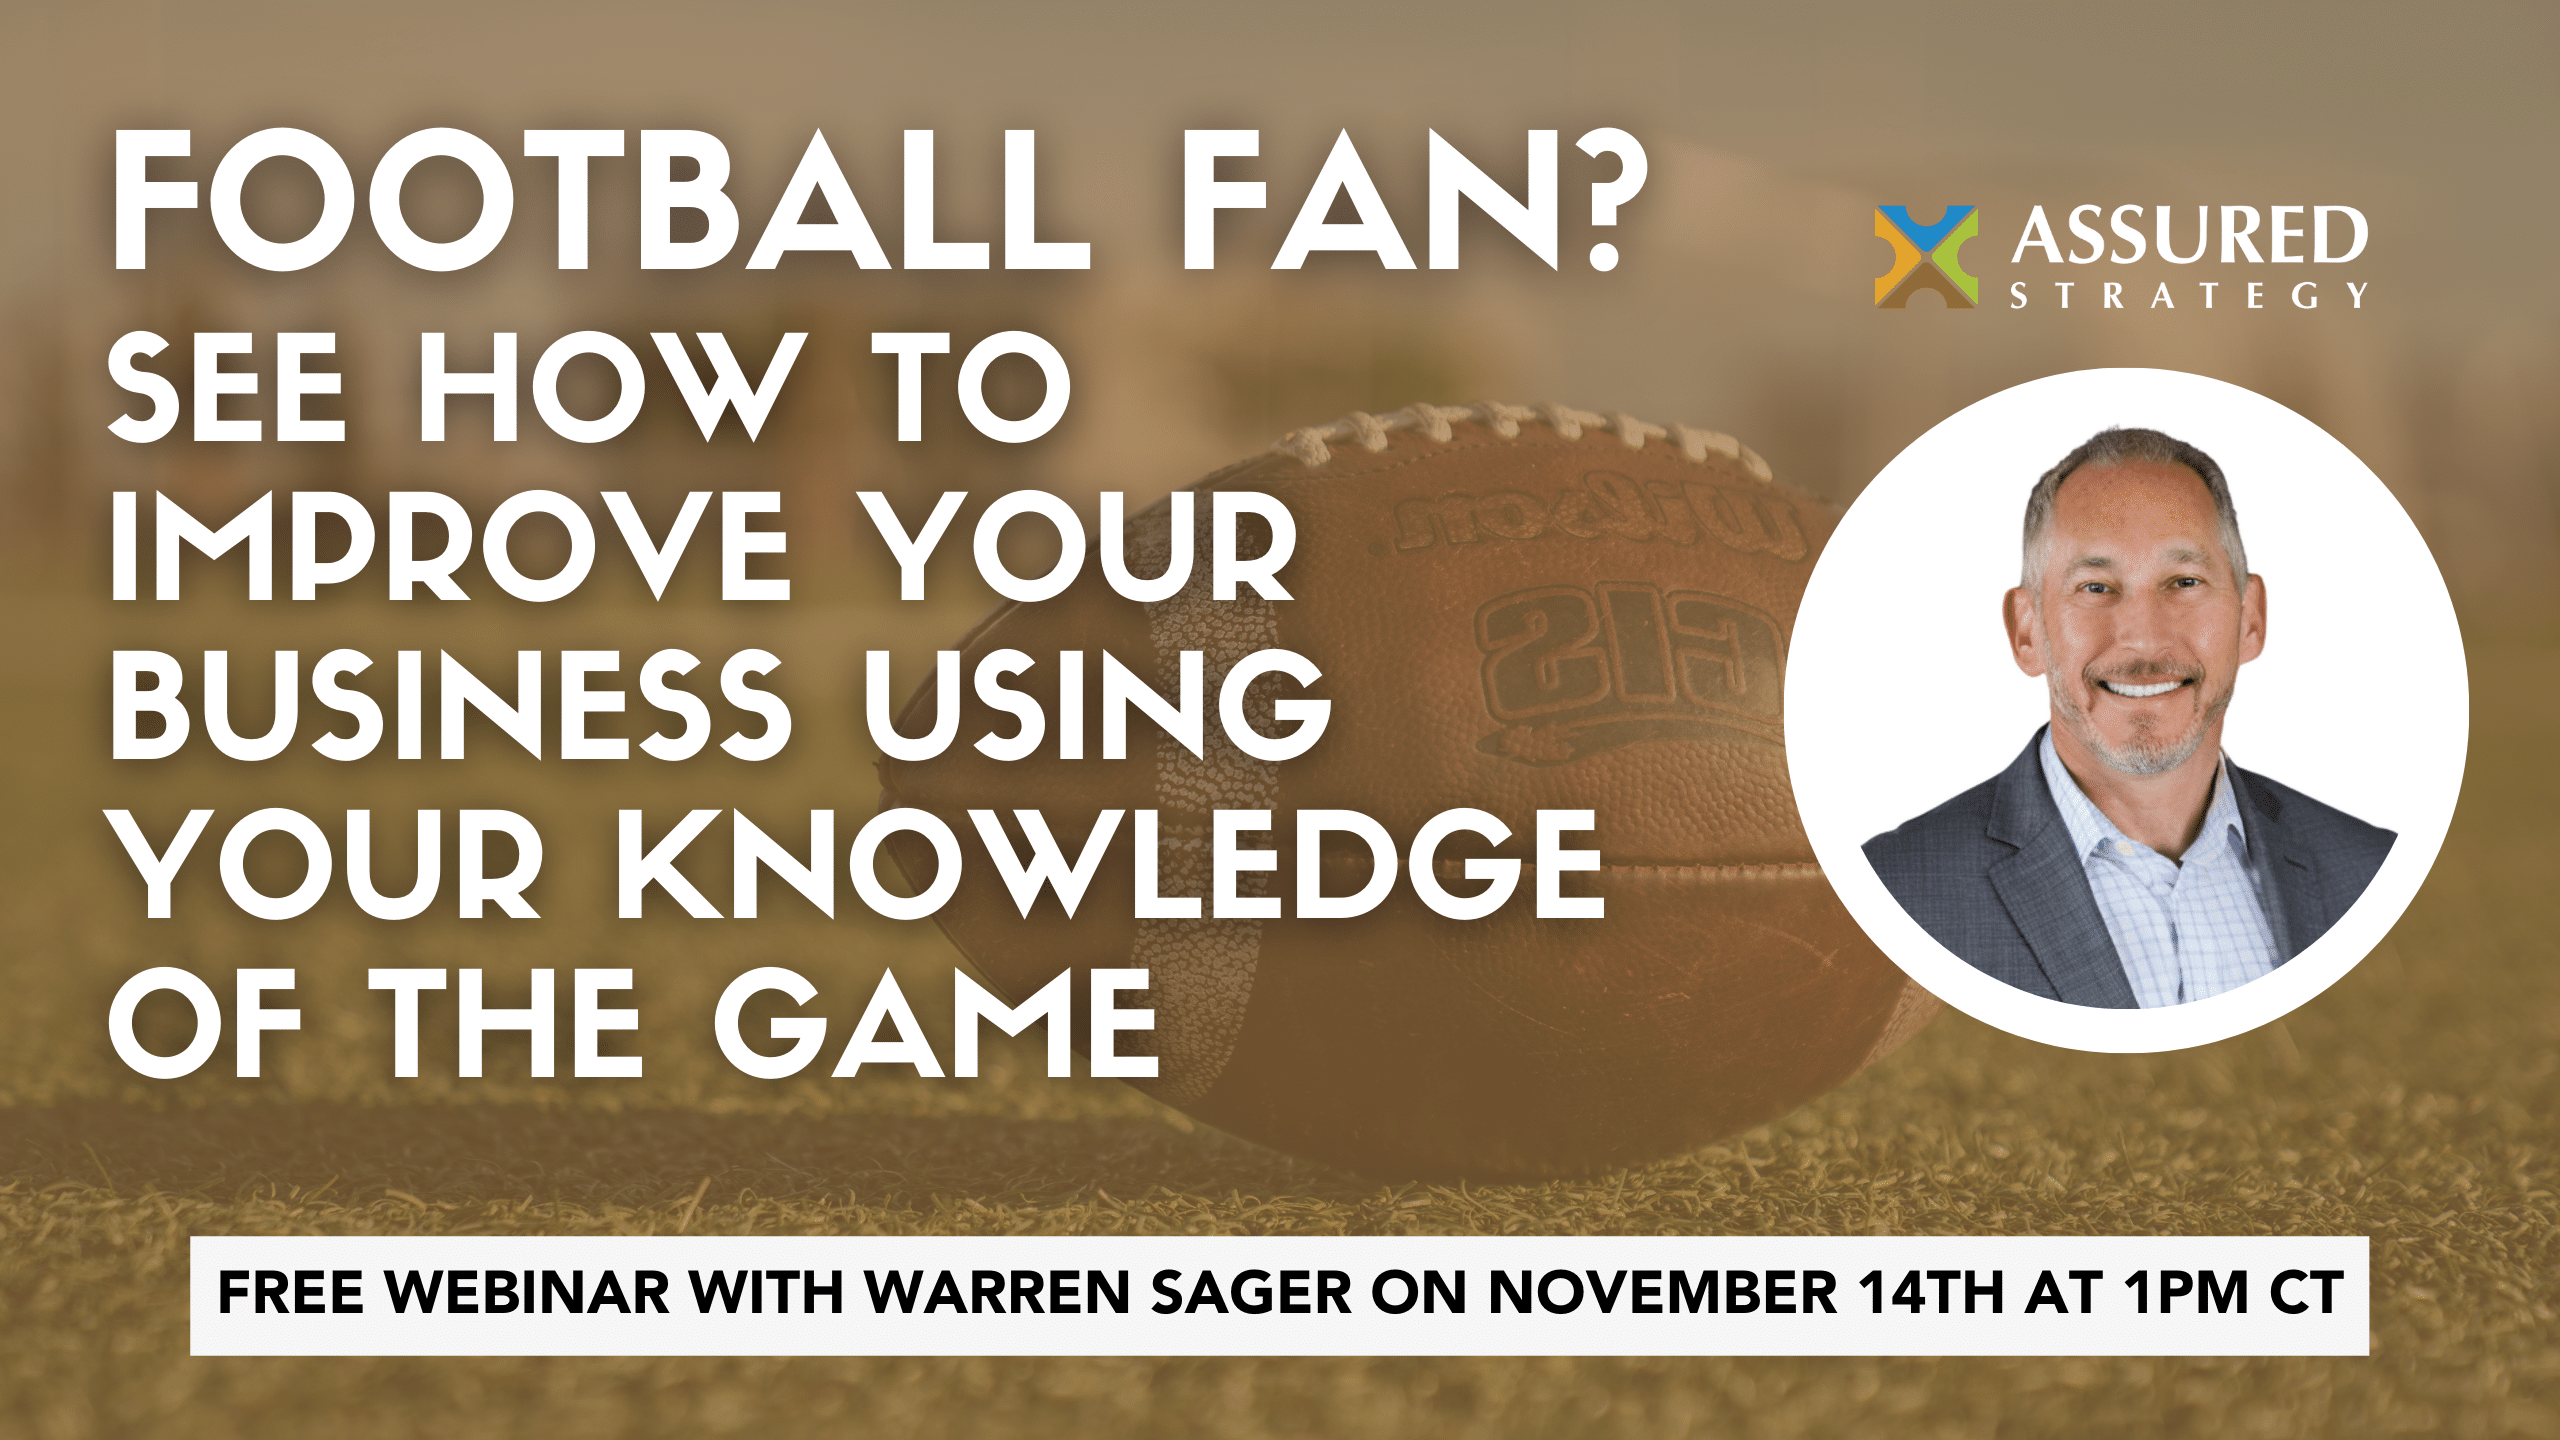 Free Webinar: 7 Ways Your Football Knowledge Can Increase Your Business Success – November 14th from 1-2pm CT